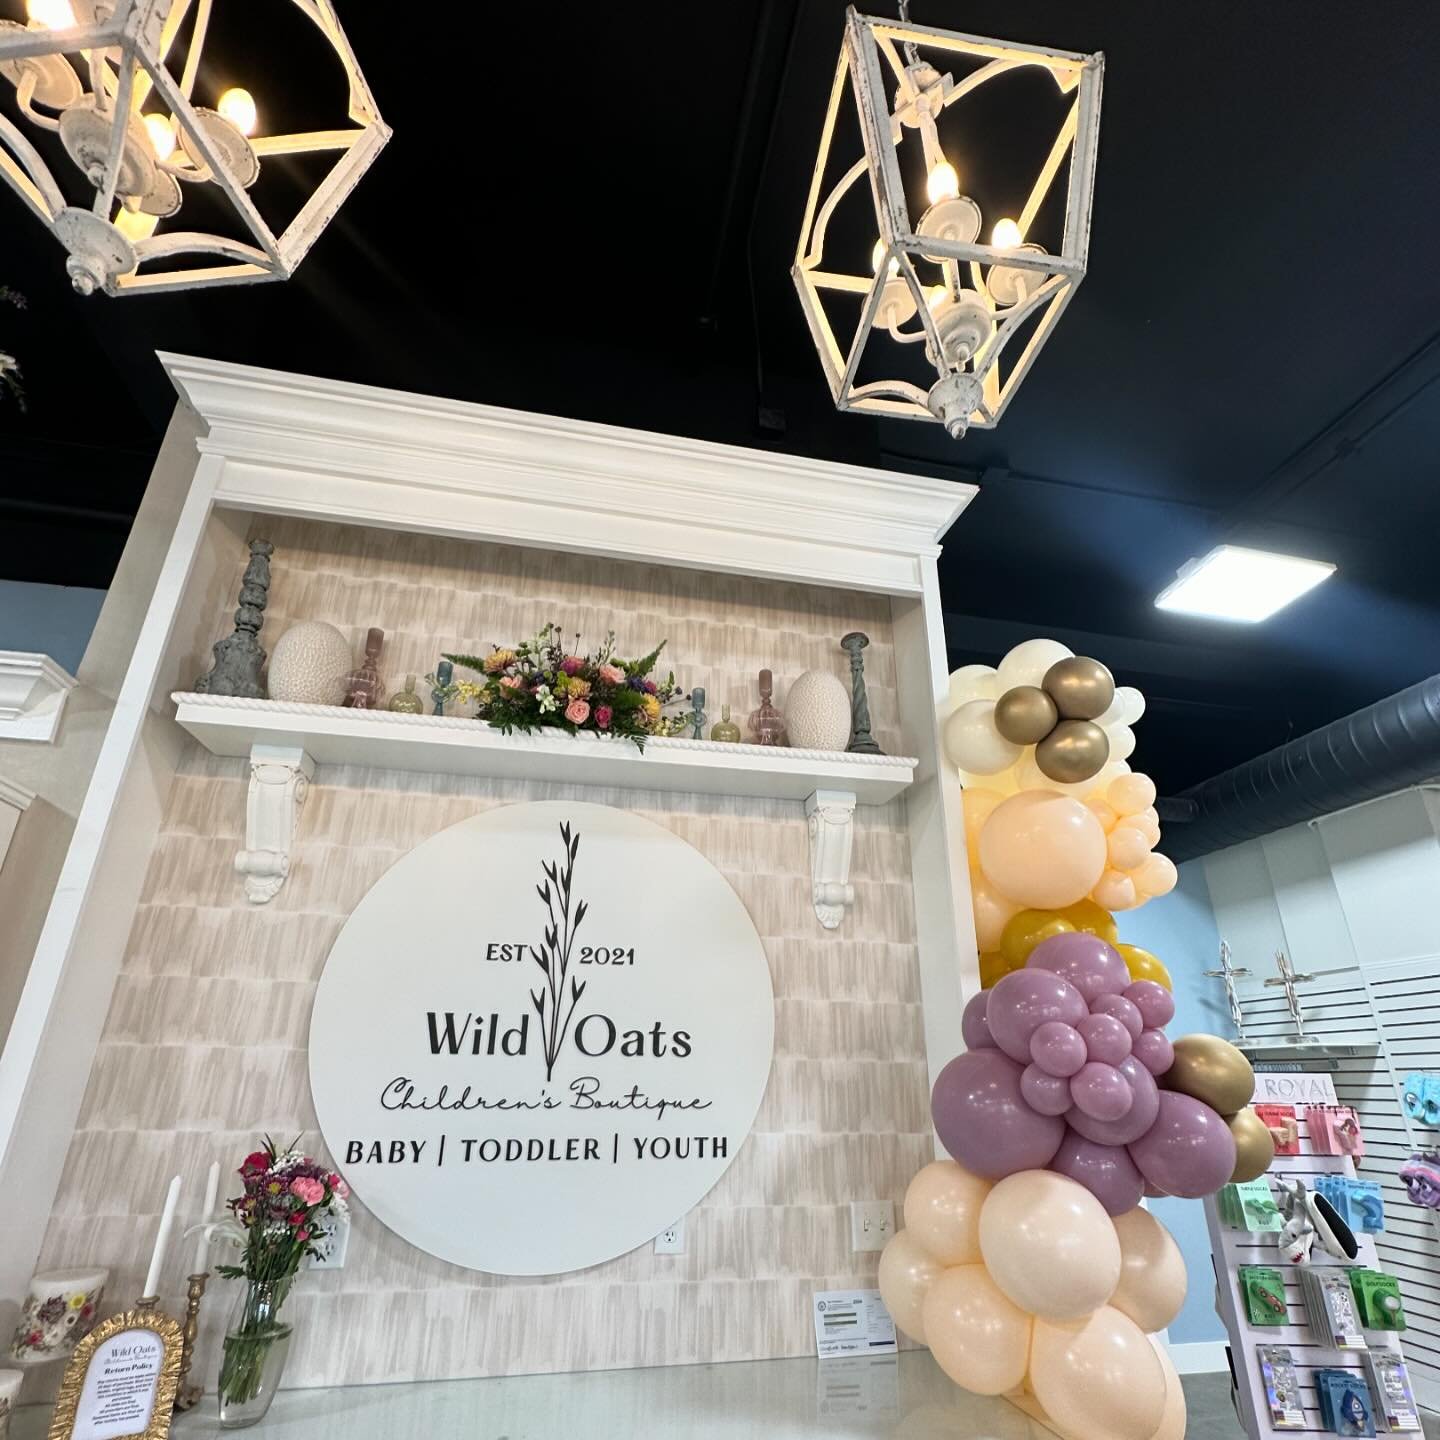 Wild Oats Children&rsquo;s Boutique is NOW OPEN! 🌿👶🏼✨

Stop in for children&rsquo;s clothing, accessories, &amp; gifts! You can shop all sizes from preemie to 14/16 in tween! 

Wild Oats carries your favorite brands like Noodle &amp; Boo, Copper P